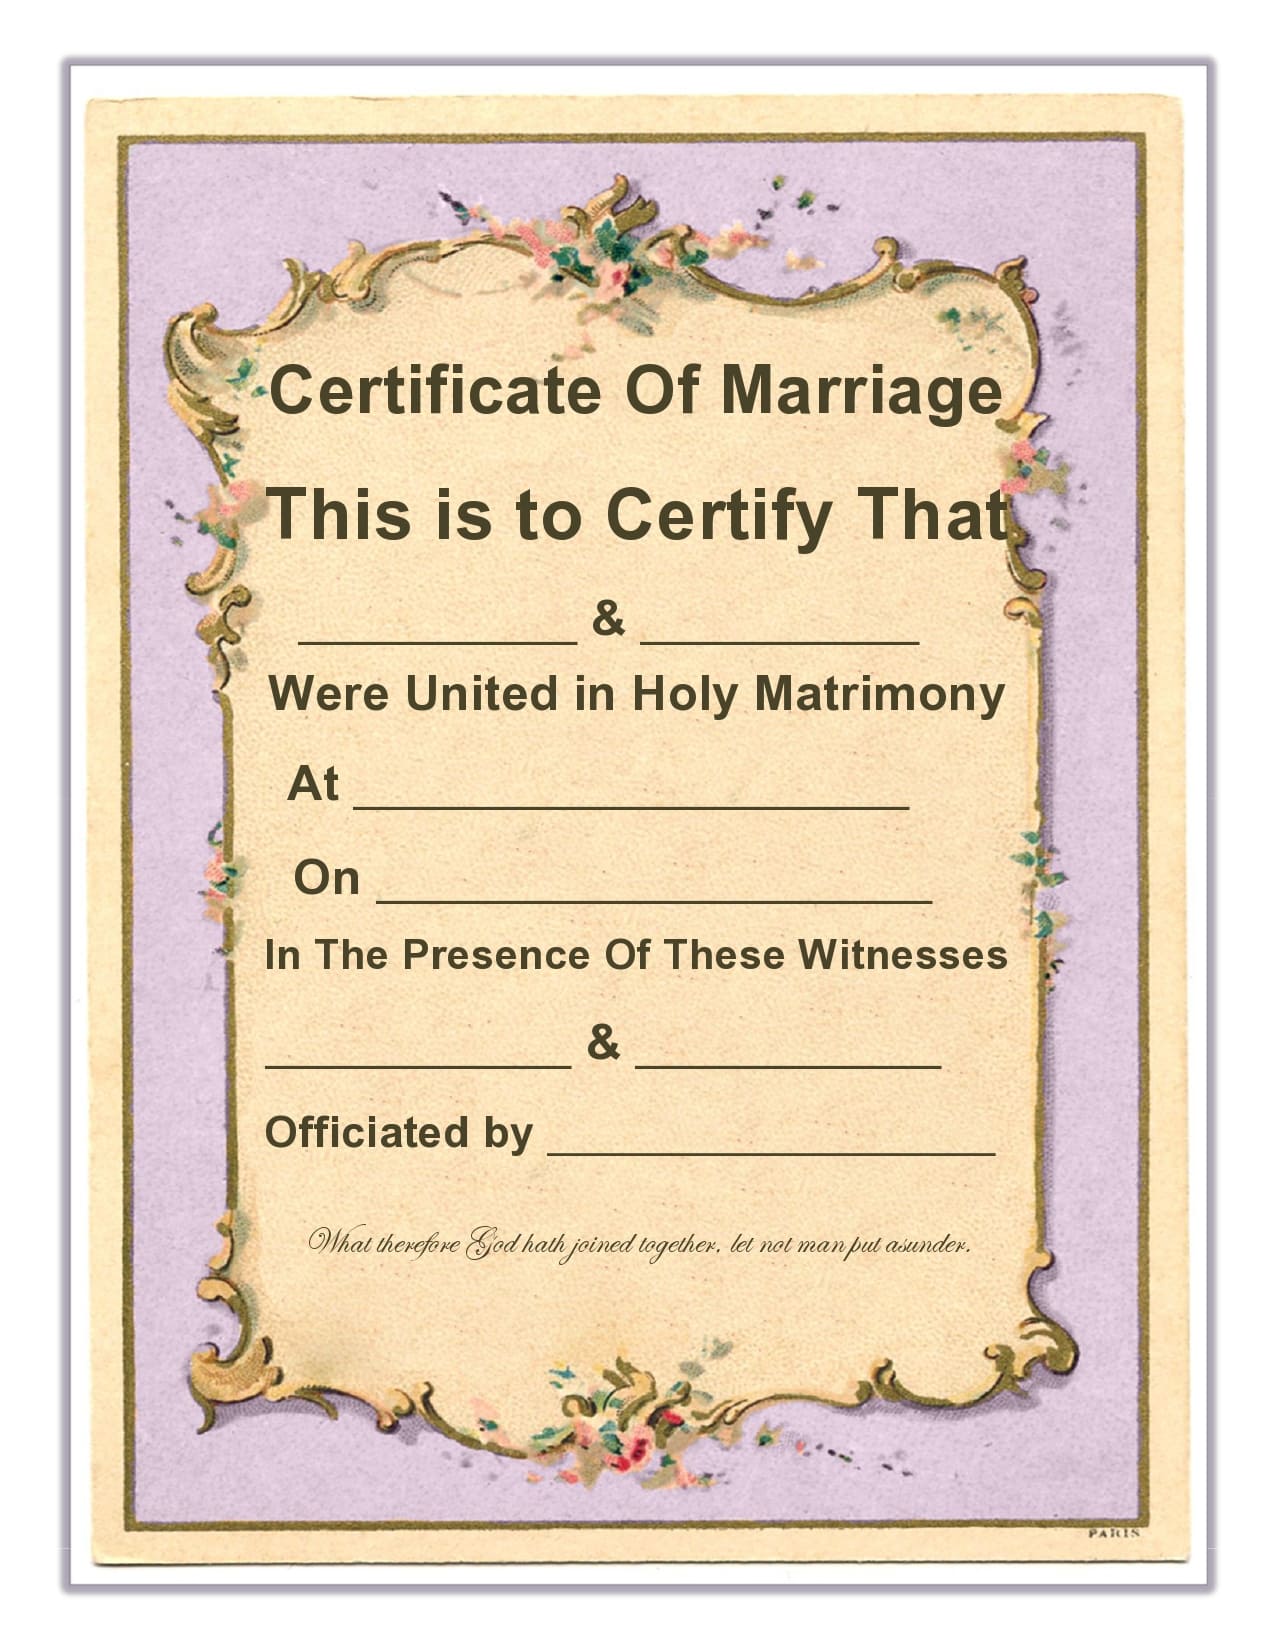 22 Real & Fake Marriage Certificate Templates (22% Free) With Certificate Of Marriage Template